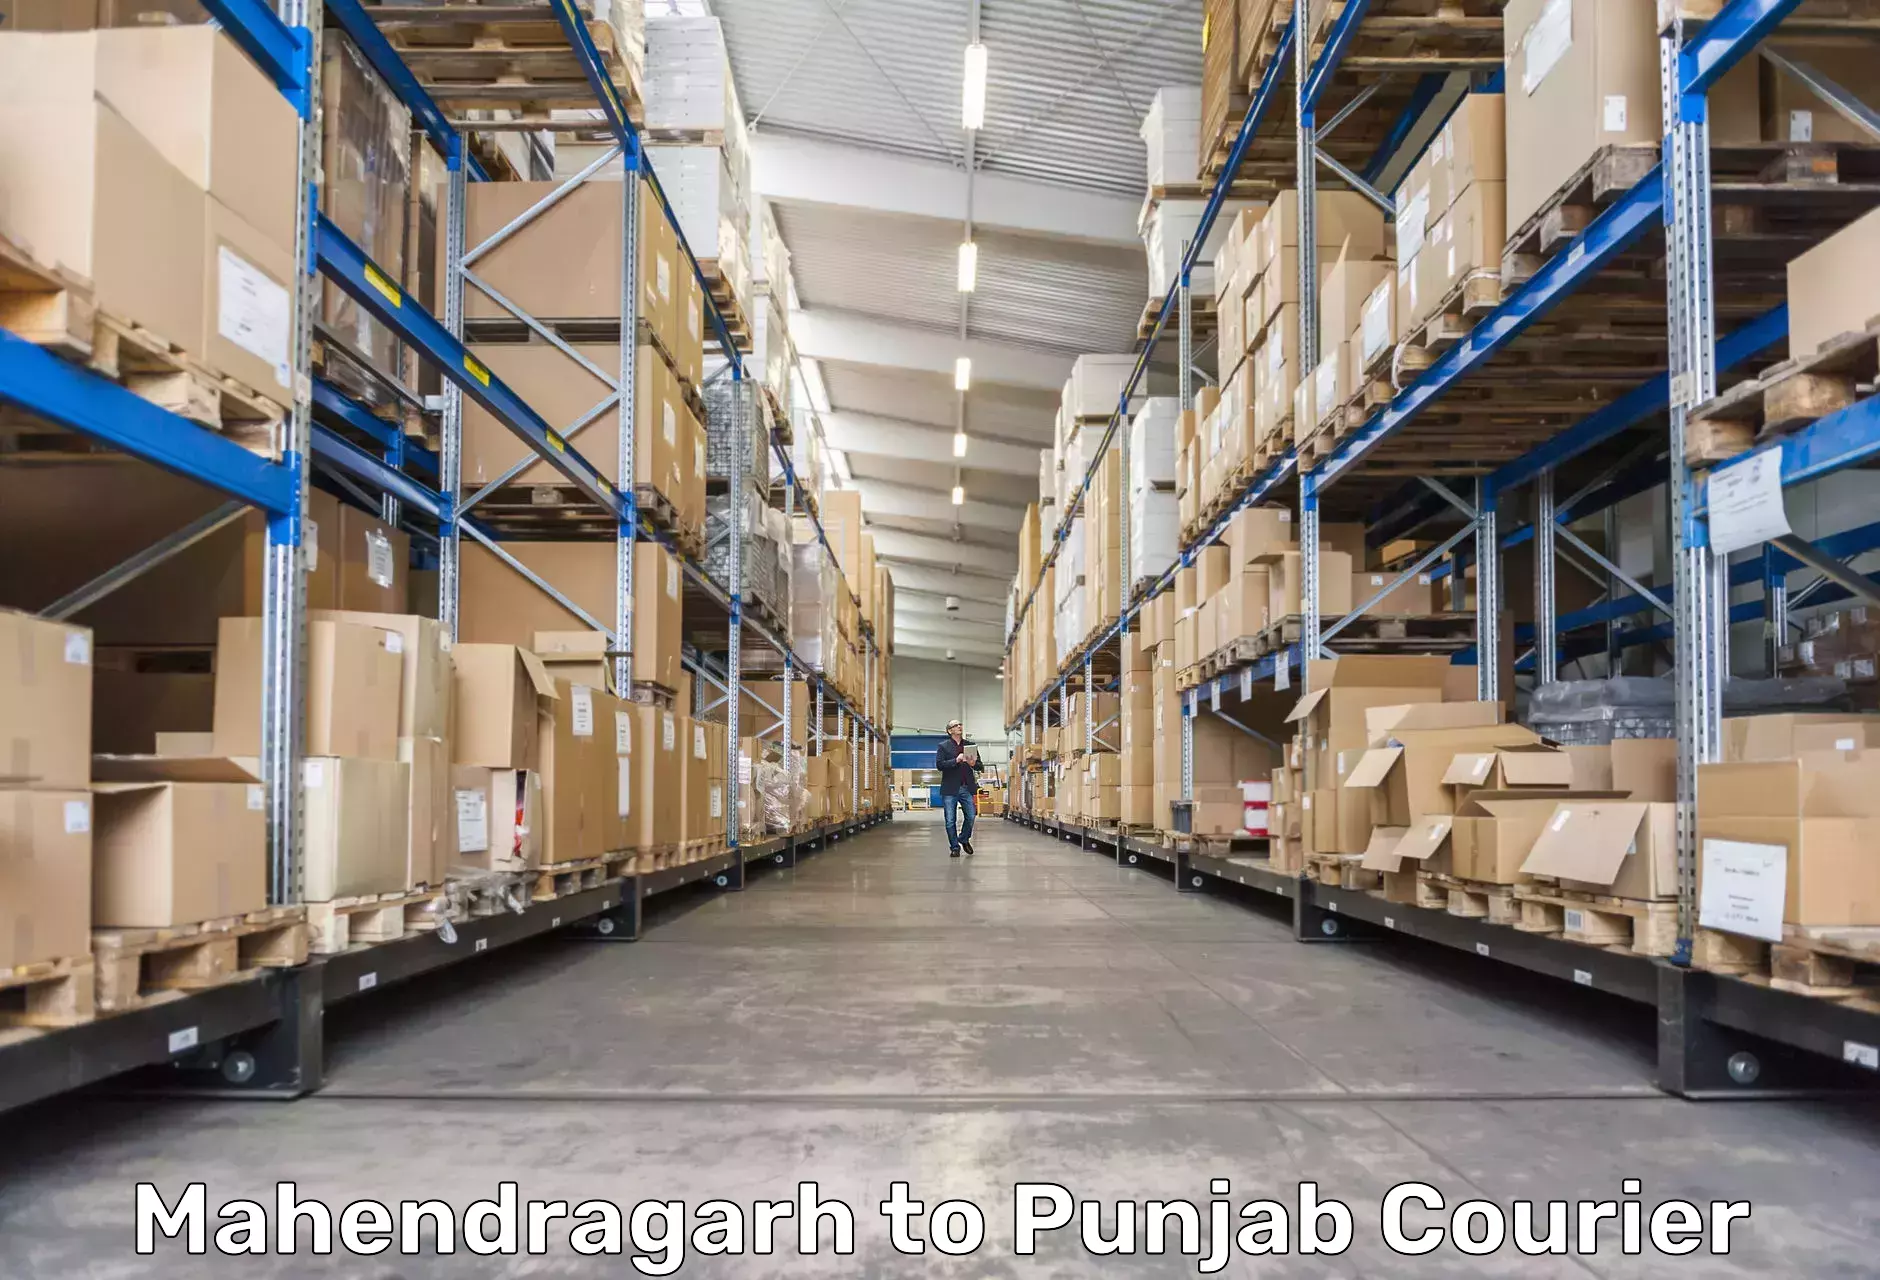 Global freight services Mahendragarh to Punjab